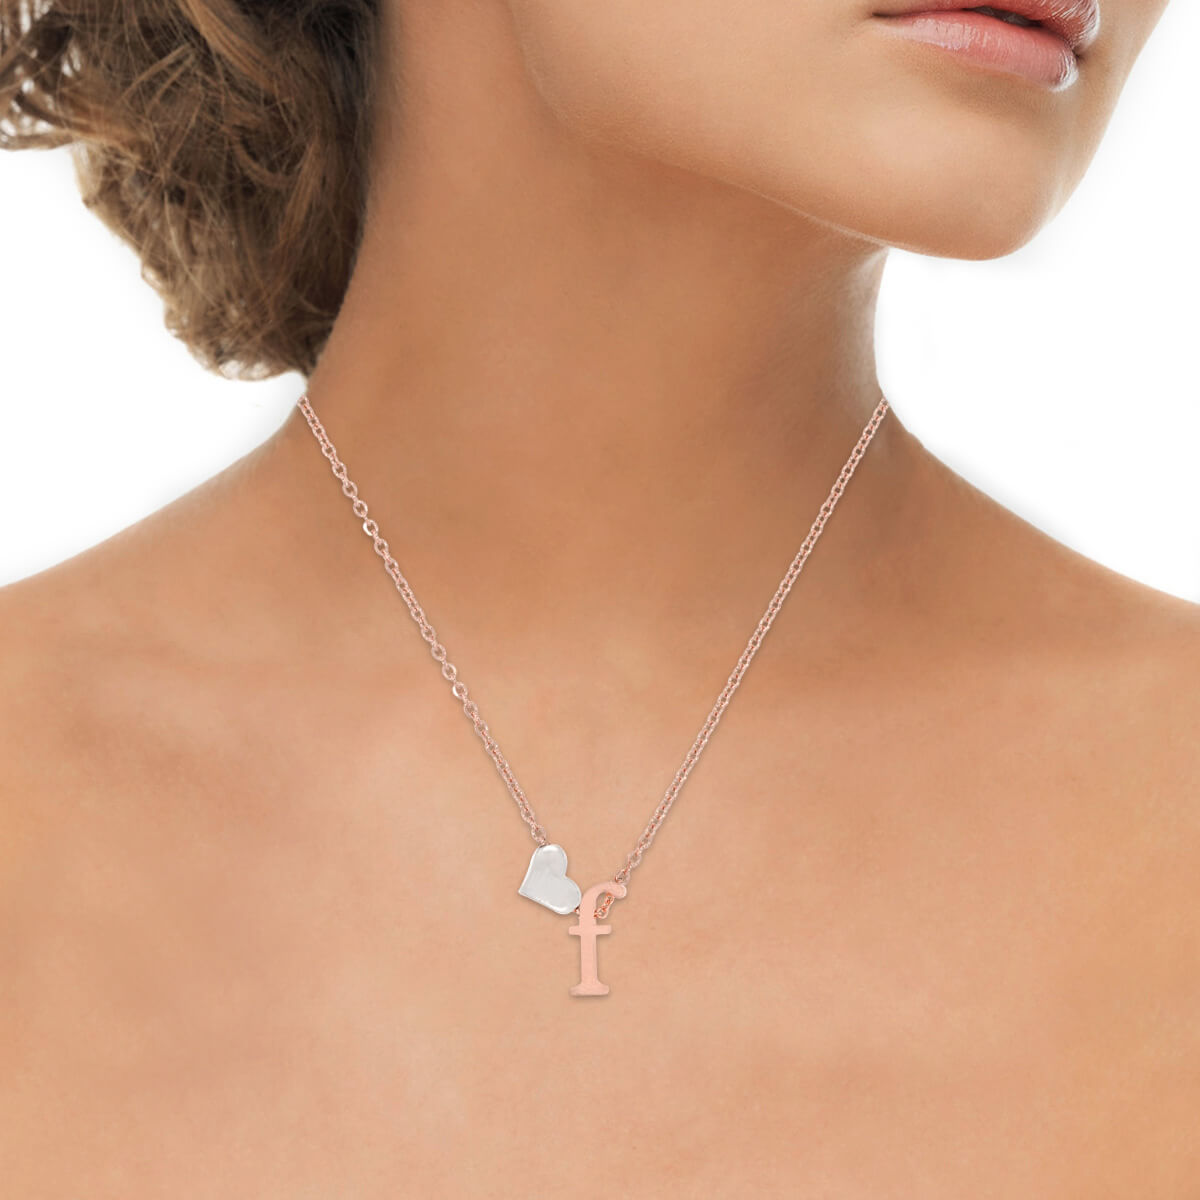 Sterling Silver "F" Initial Necklace